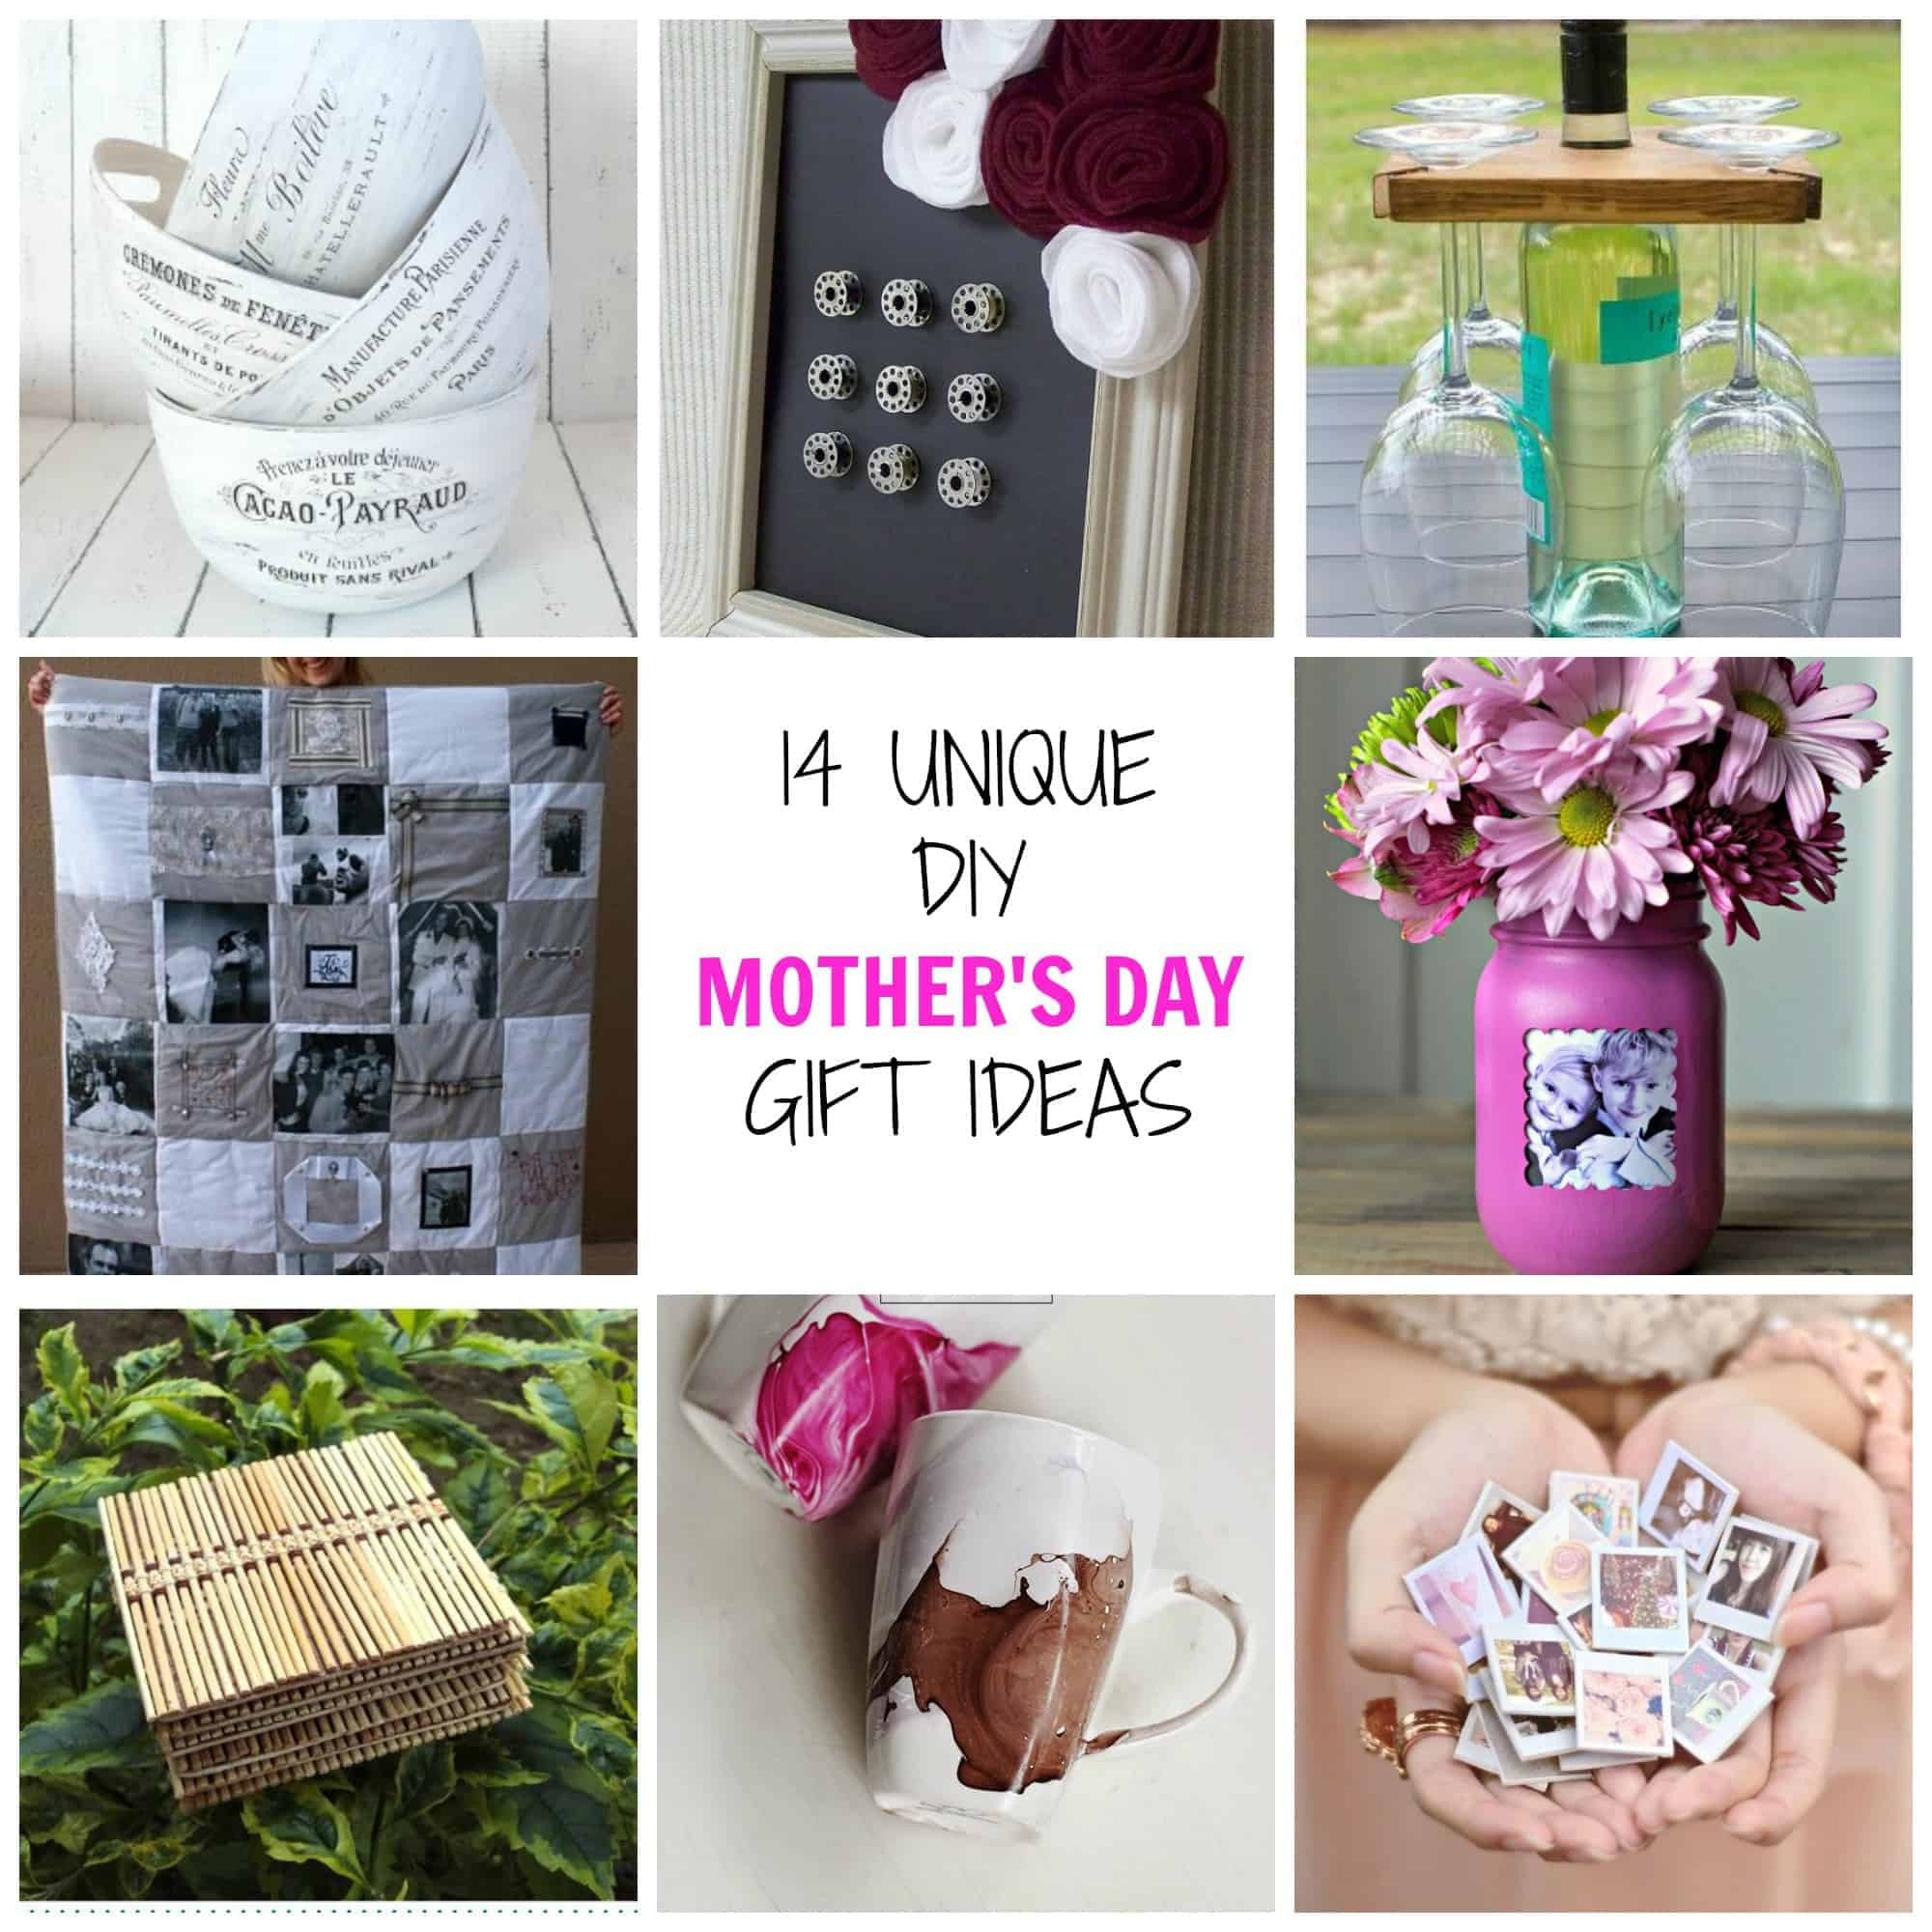 Mothers Day Gift Ideads
 14 Unique DIY Mother s Day Gifts Simplify Create Inspire